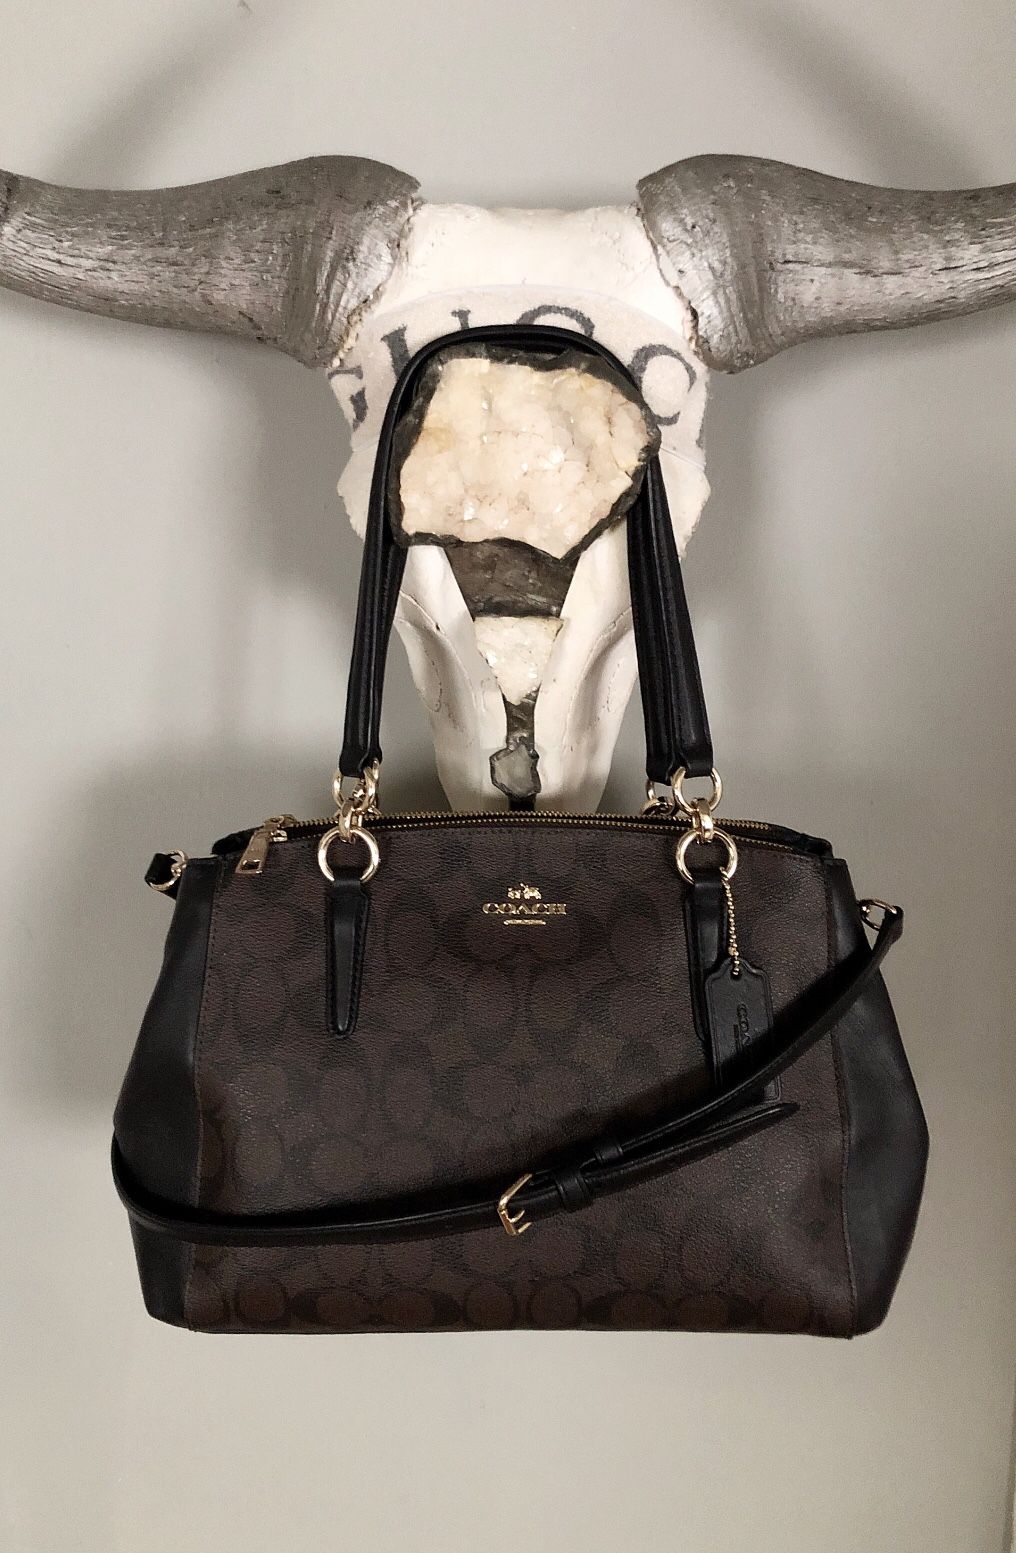 New! Coach Christie Carryall bag retail $395 Brand new without tags. 100% Authentic! Two lined outer zippered pockets, with a center open top compart